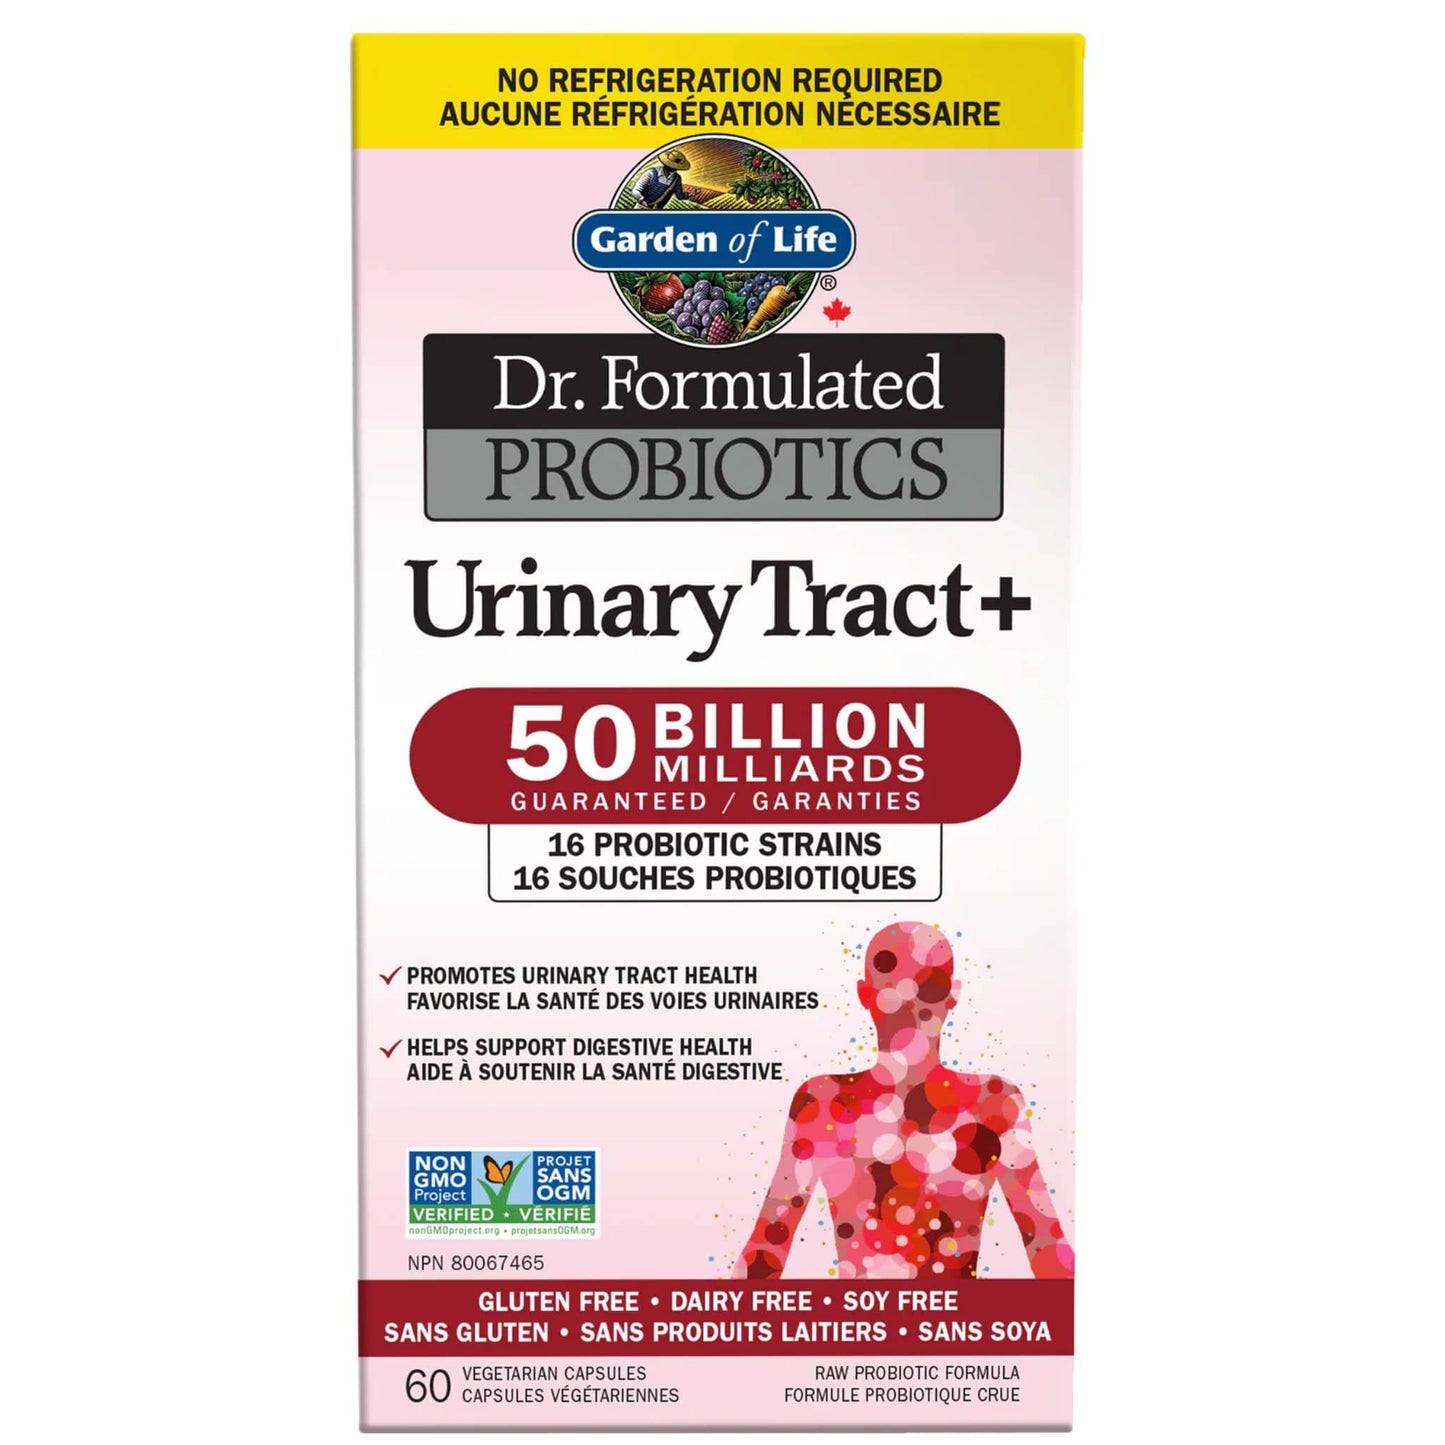 60 Vegetable Capsules | Garden of Life Dr. Formulated Probiotics Urinary Tract Plus 50 Billion